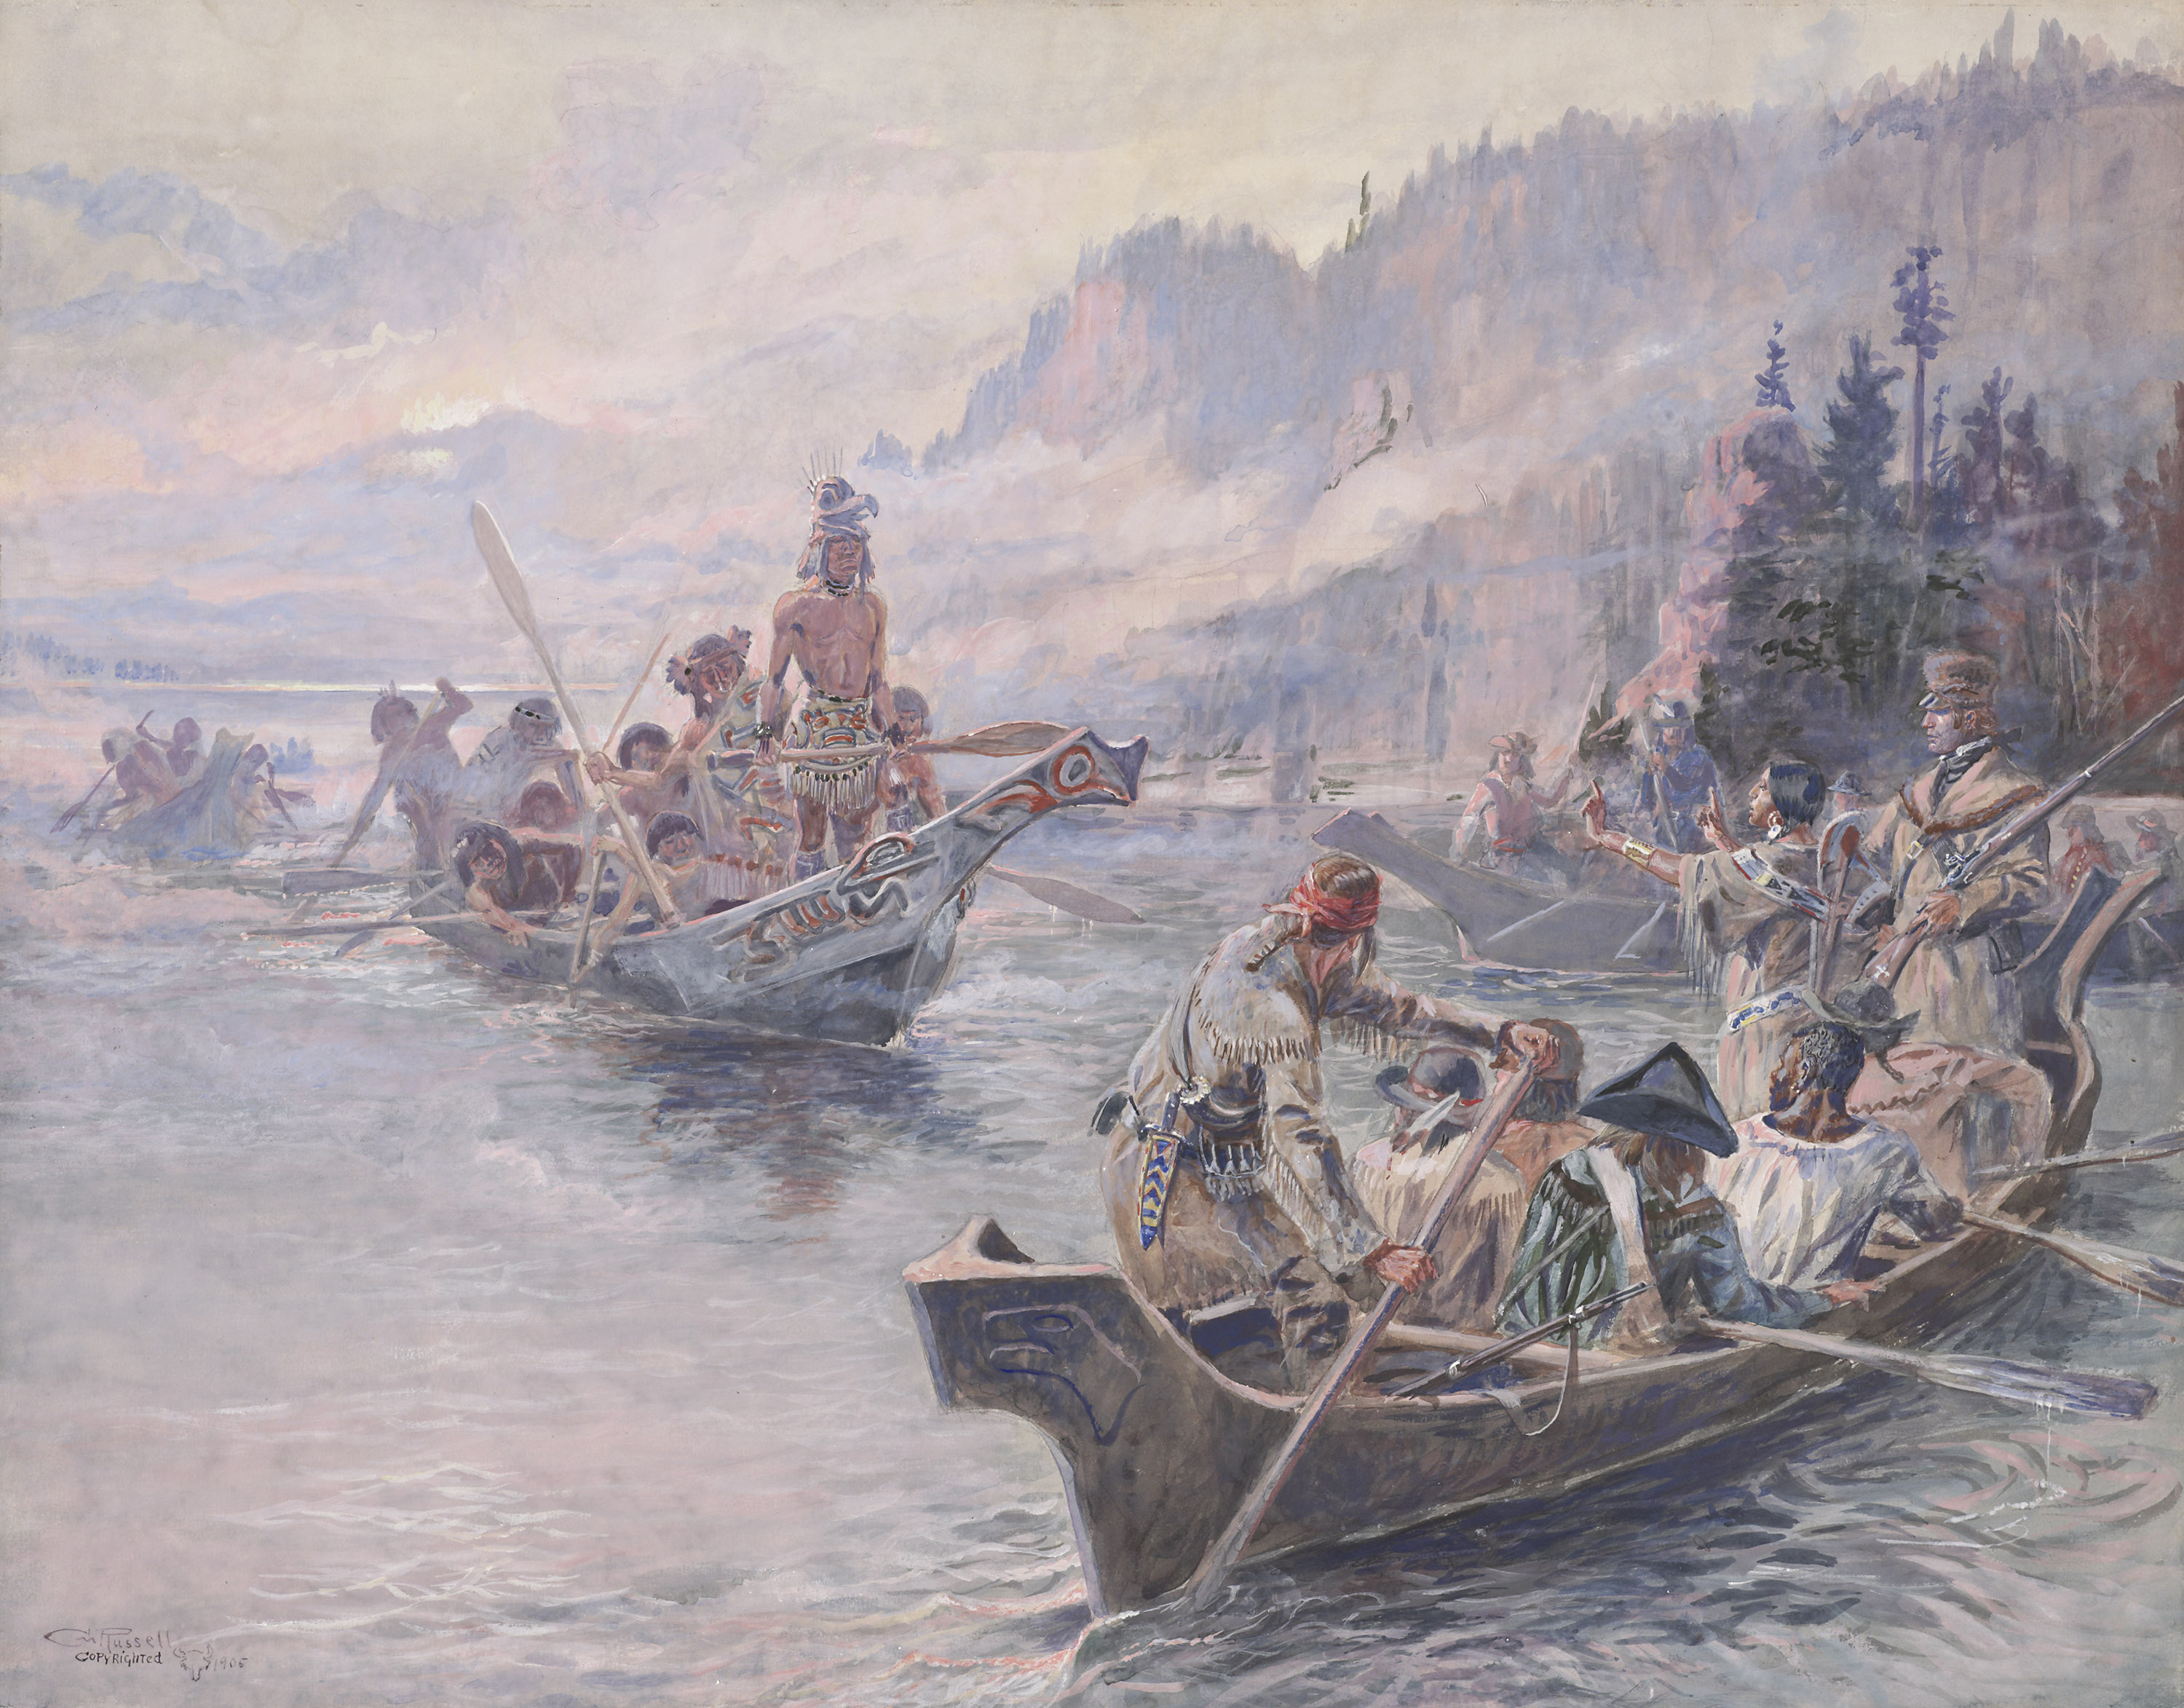 Lewis and Clark on the Lower Columbia, an exploratory expedition led by guides